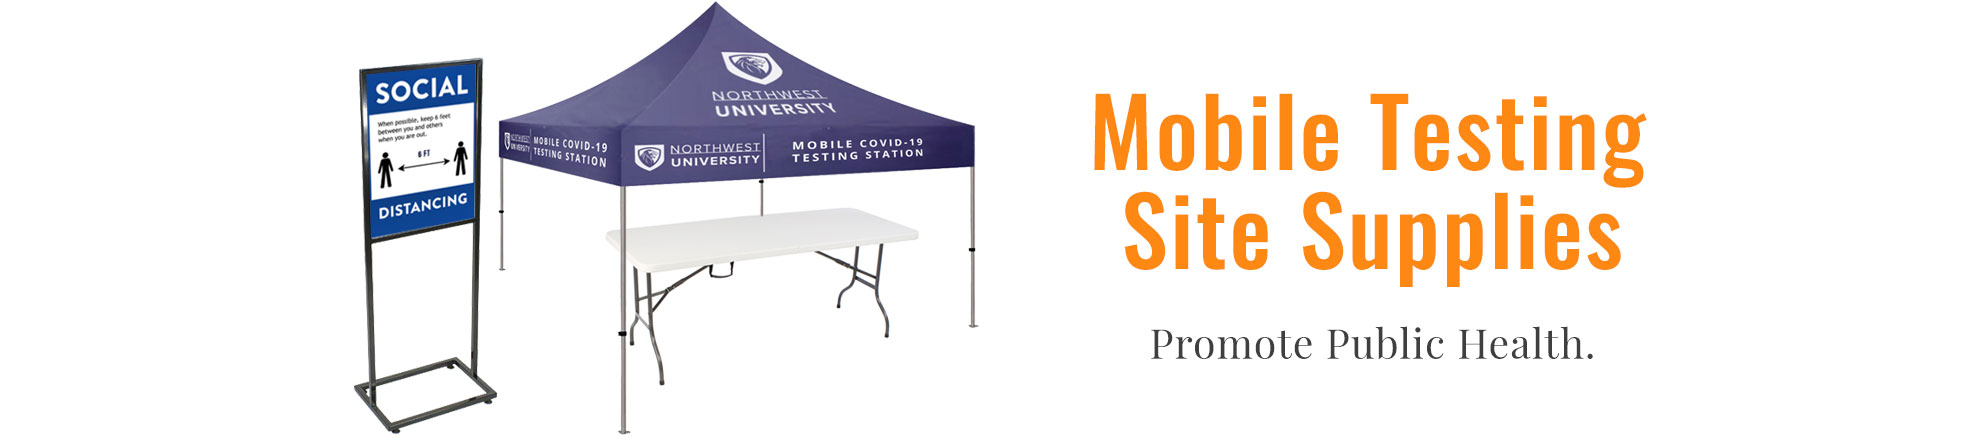 Mobile testing site supplies for public COVID-19 screenings